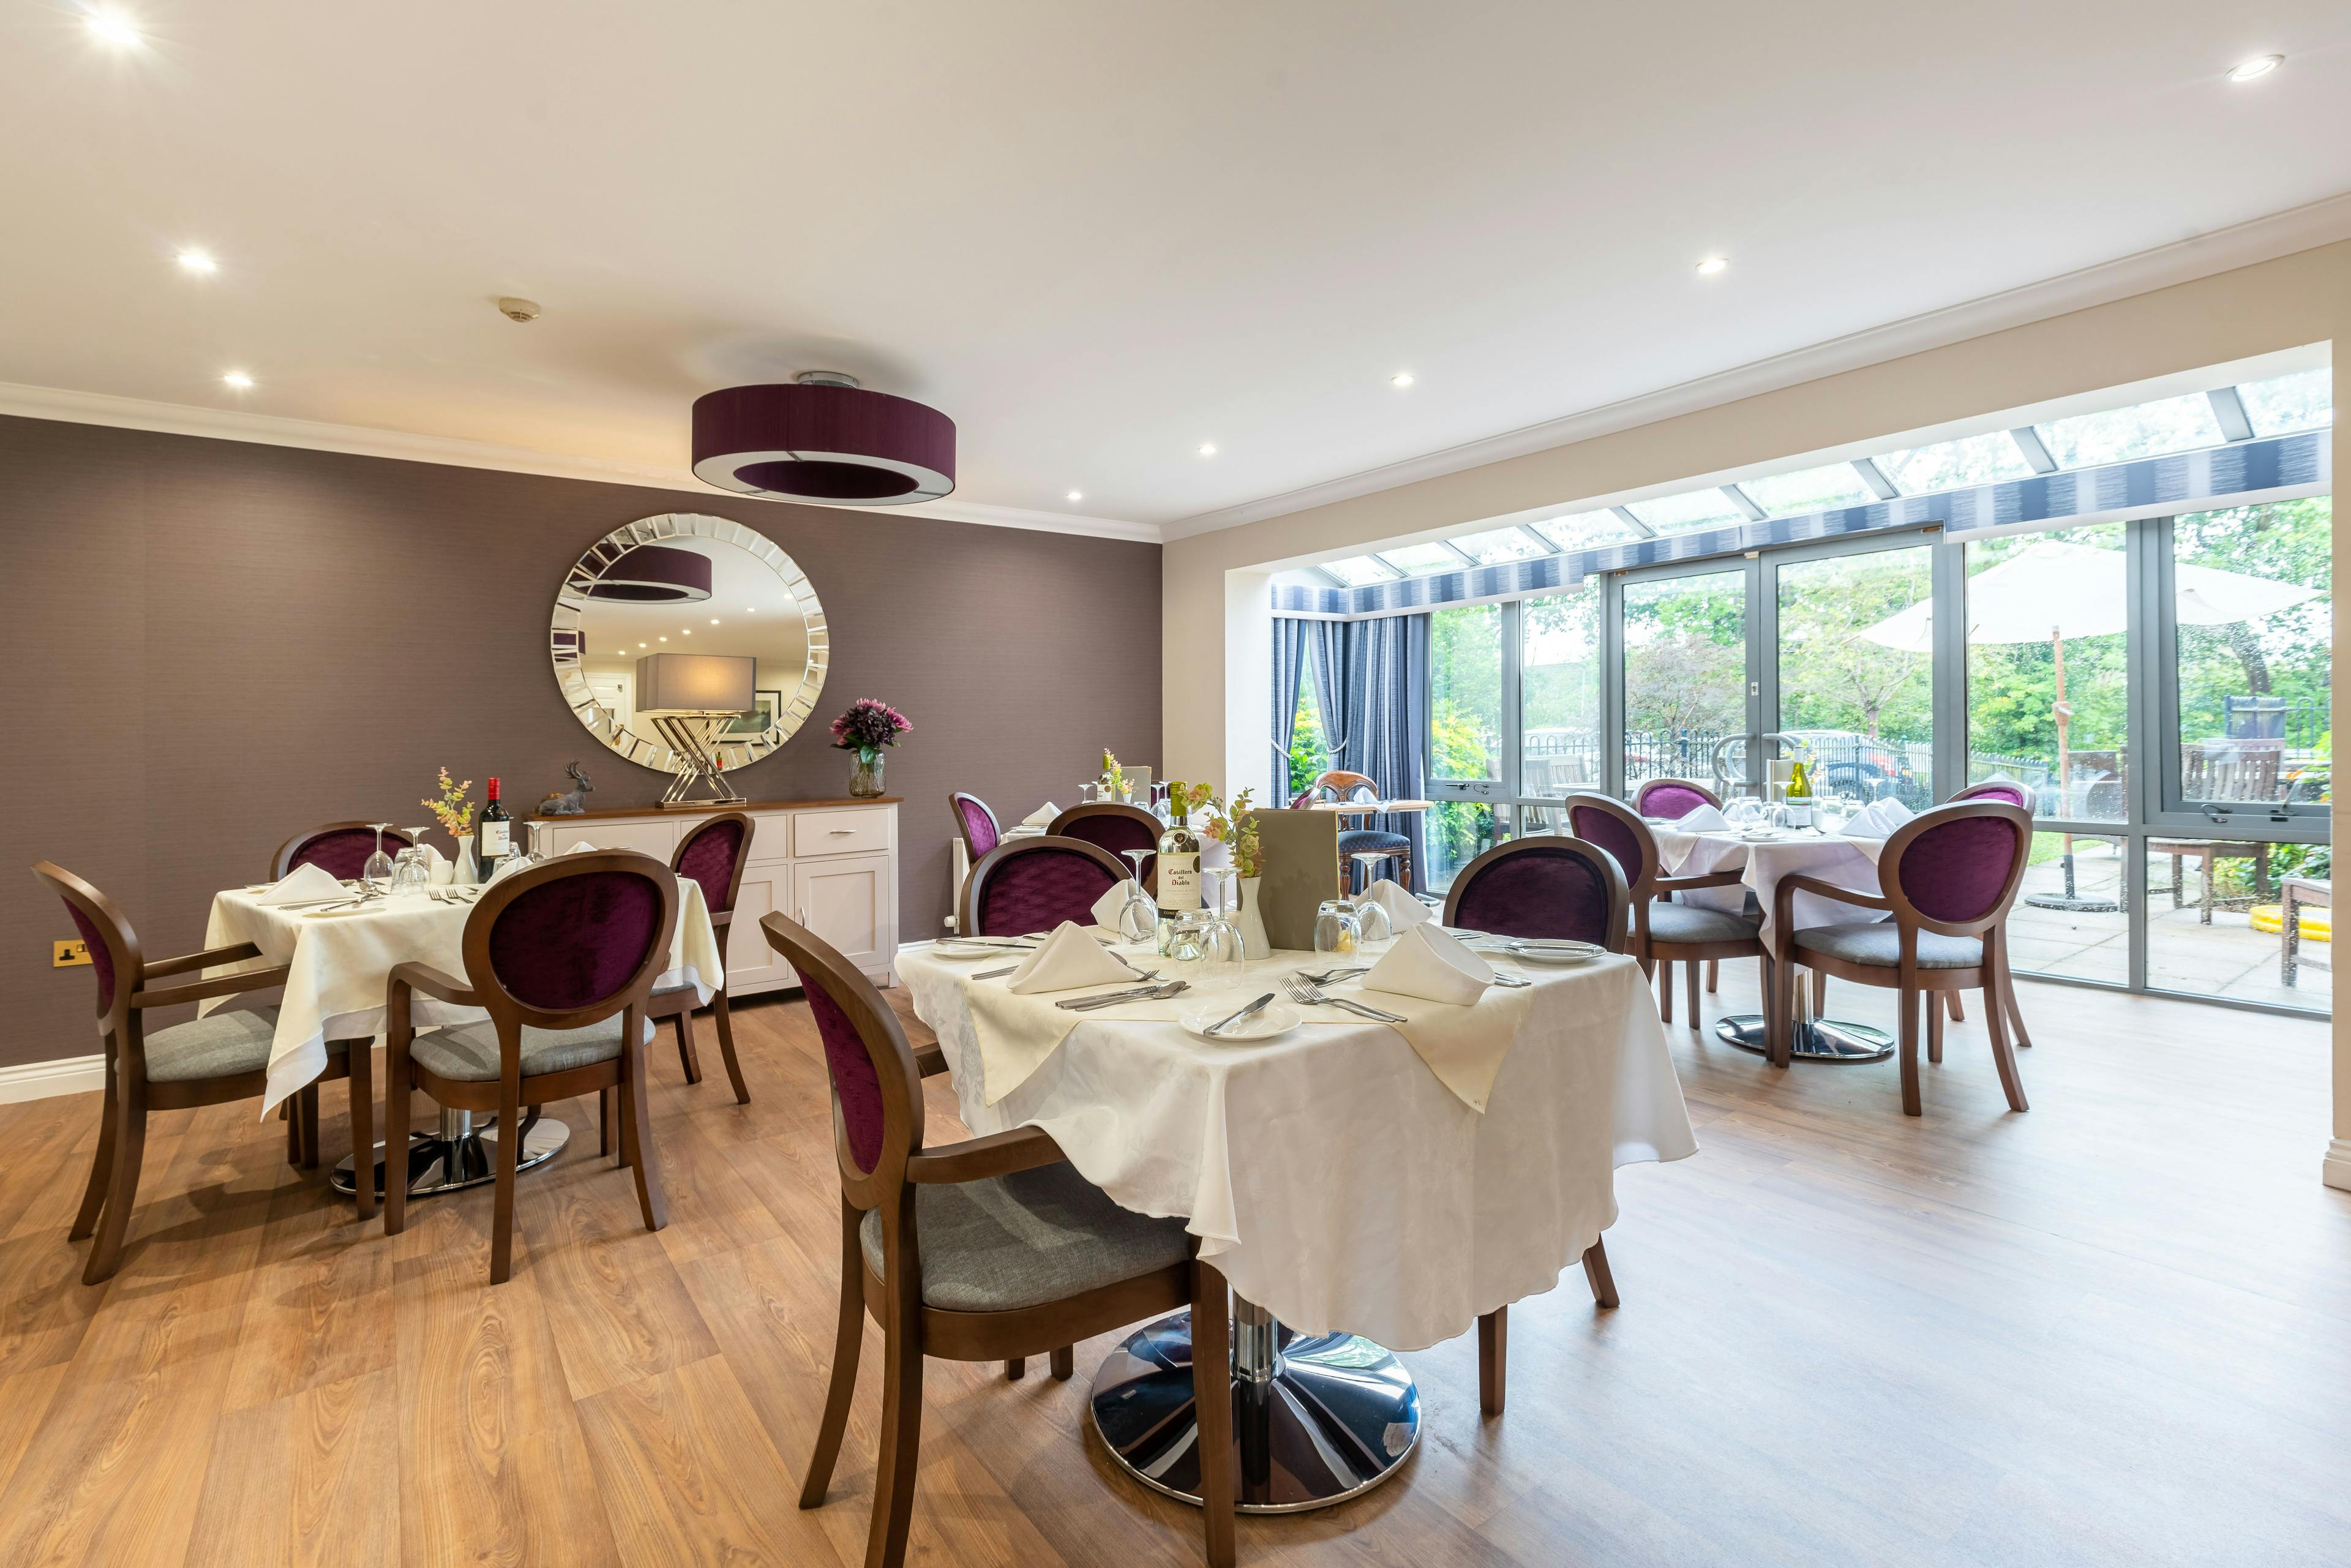 Dining Room at Tandridge Heights Care Home in Oxted, Surrey